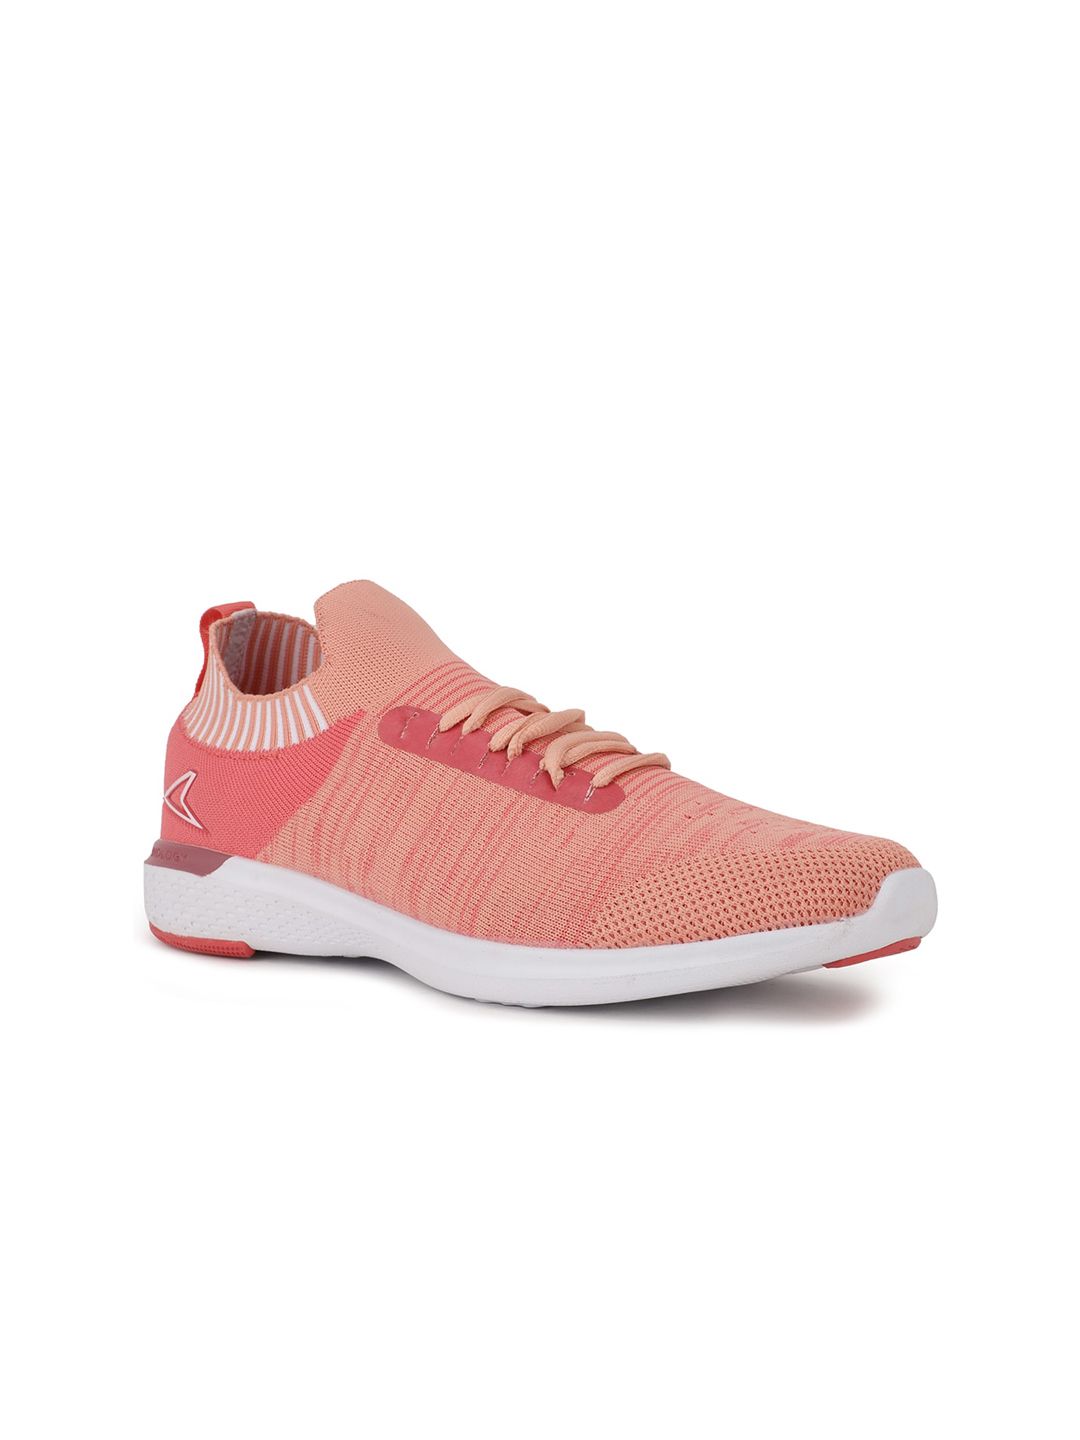 Power Women Peach-Coloured Woven Design Sneakers Price in India